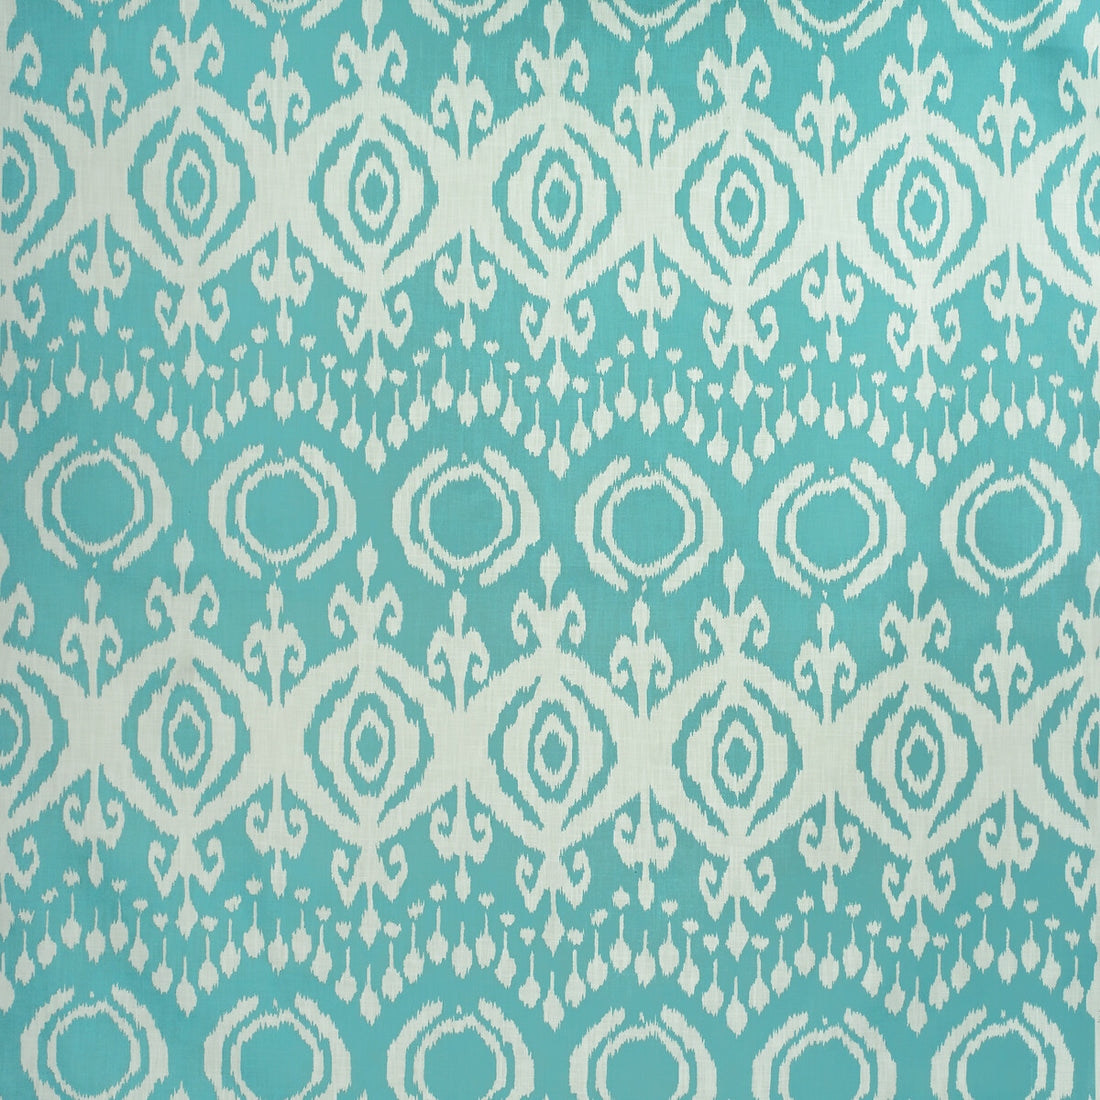 Volcano Outdoor fabric in lagoon color - pattern AM100352.13.0 - by Kravet Couture in the Andrew Martin The Great Outdoors collection